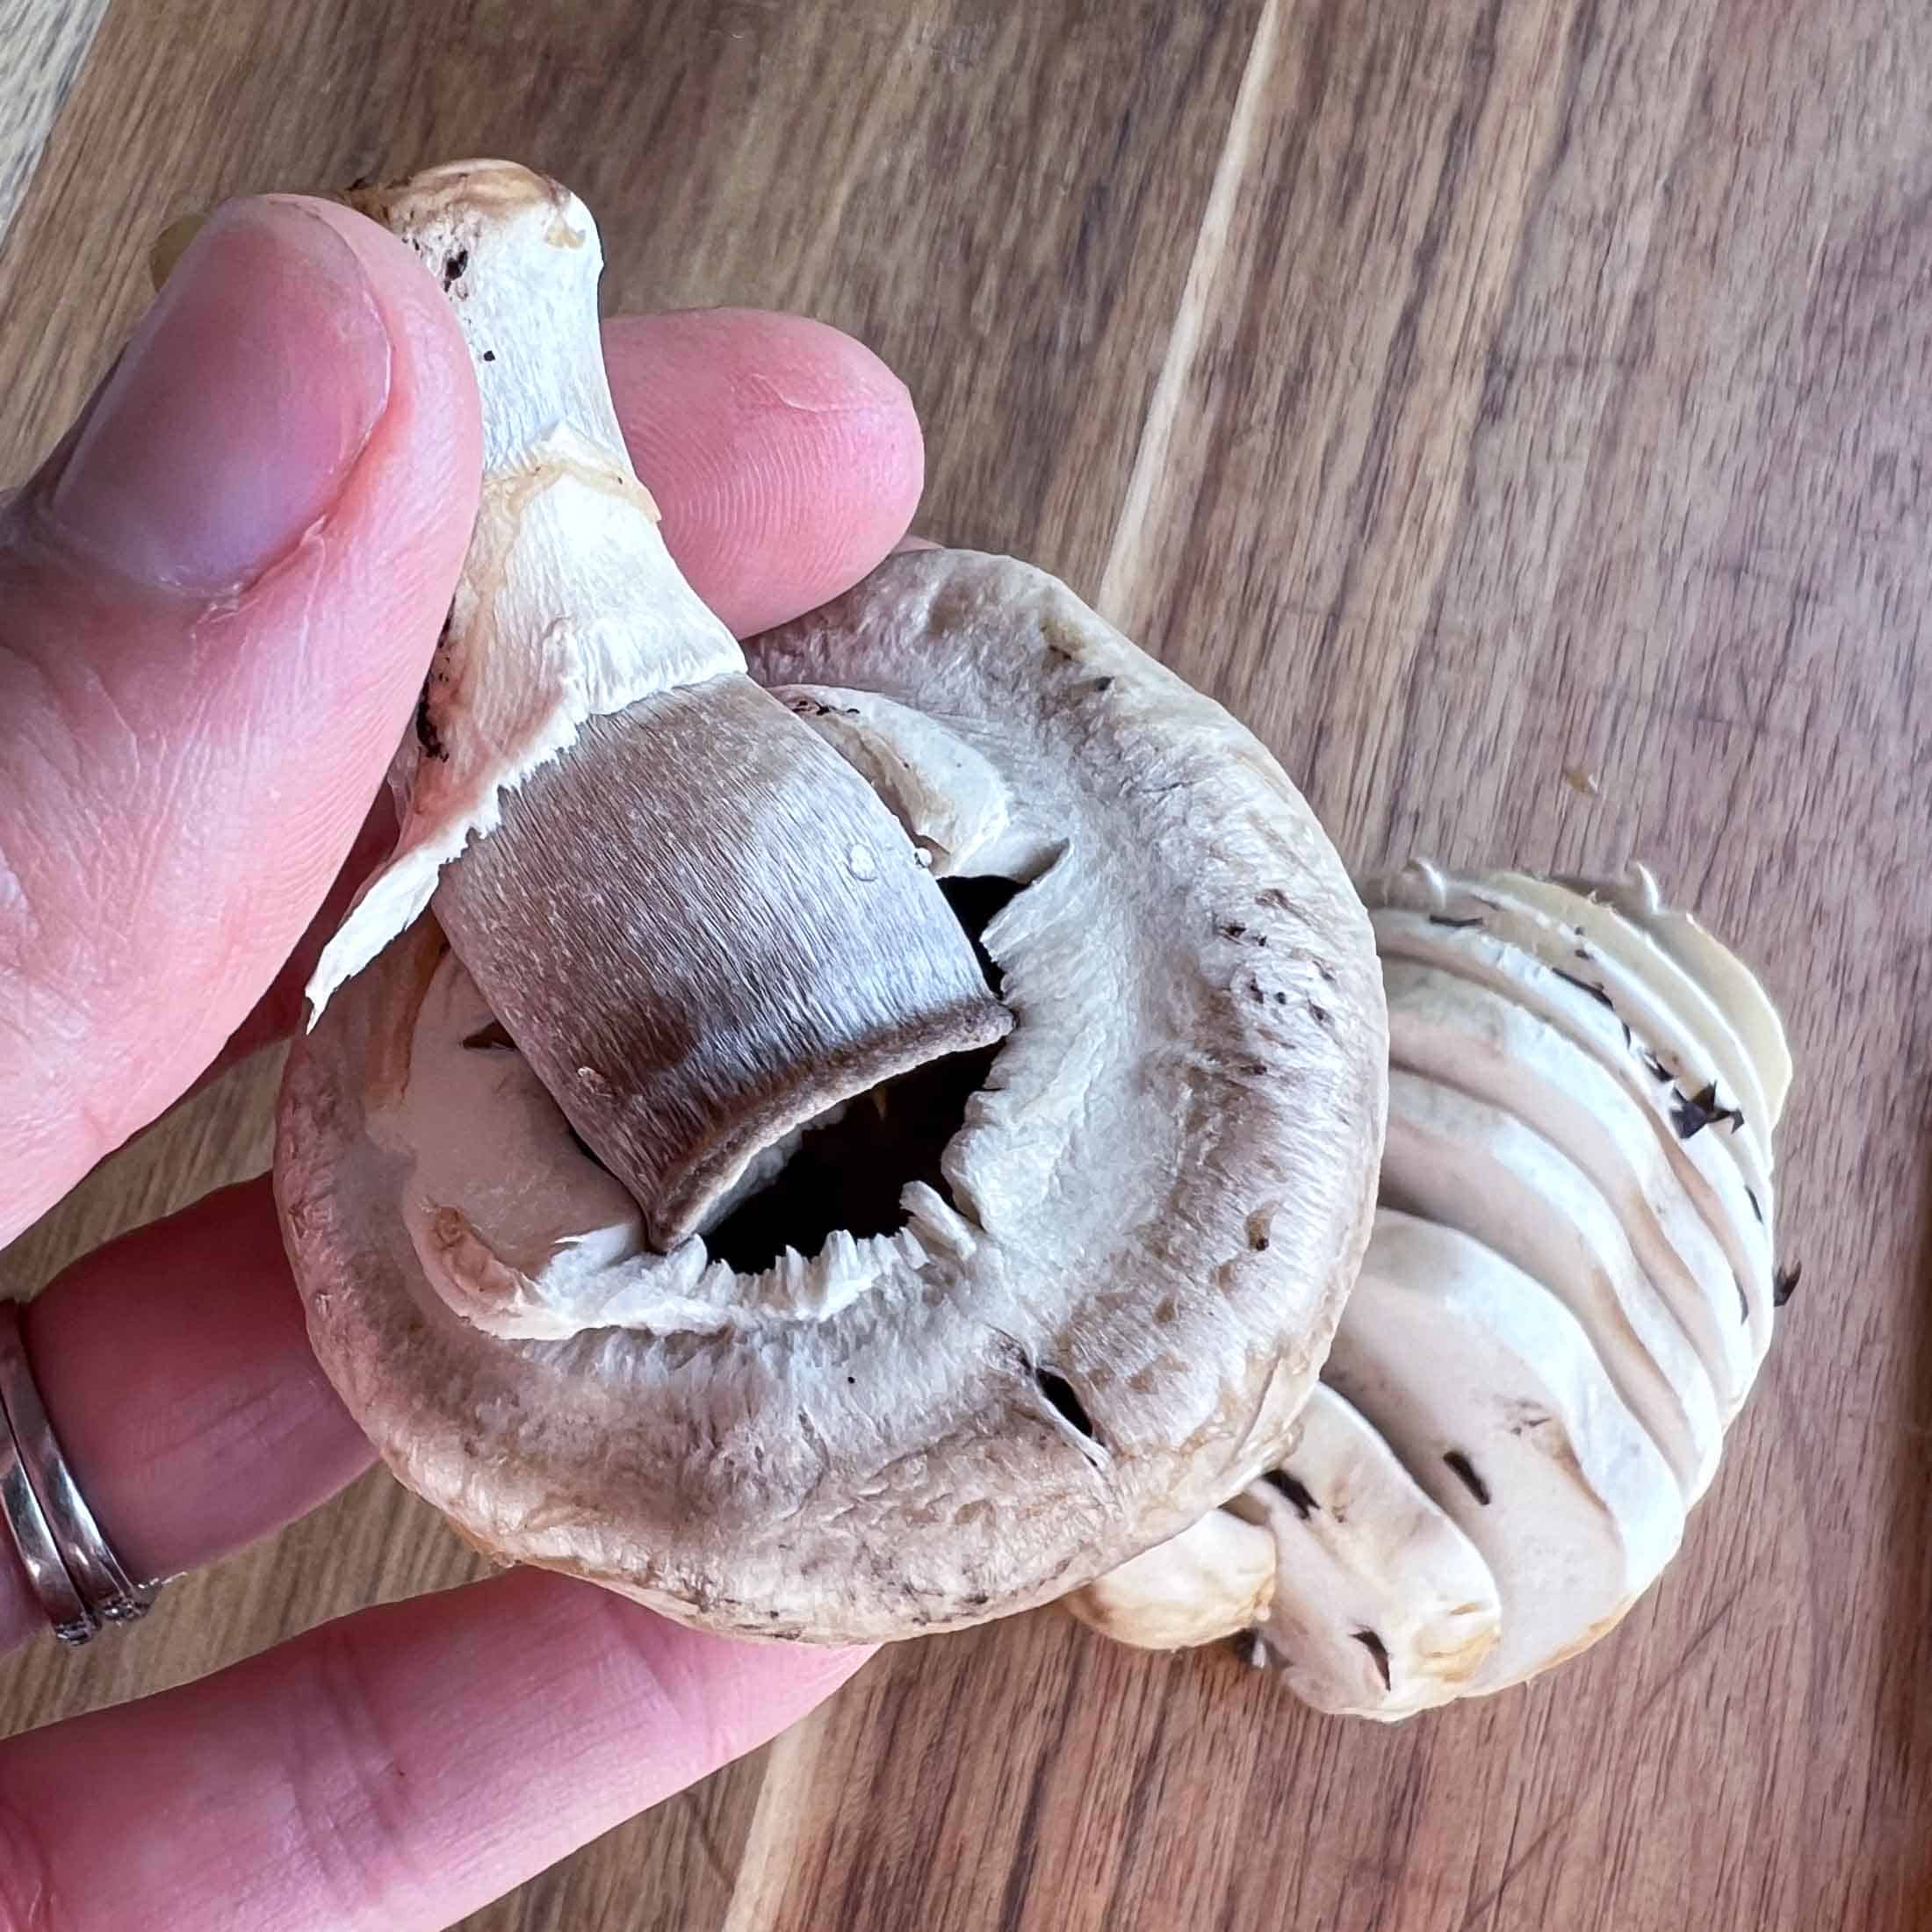 One hand snapping a stem off of a mushroom with a sliced mushroom underneath.